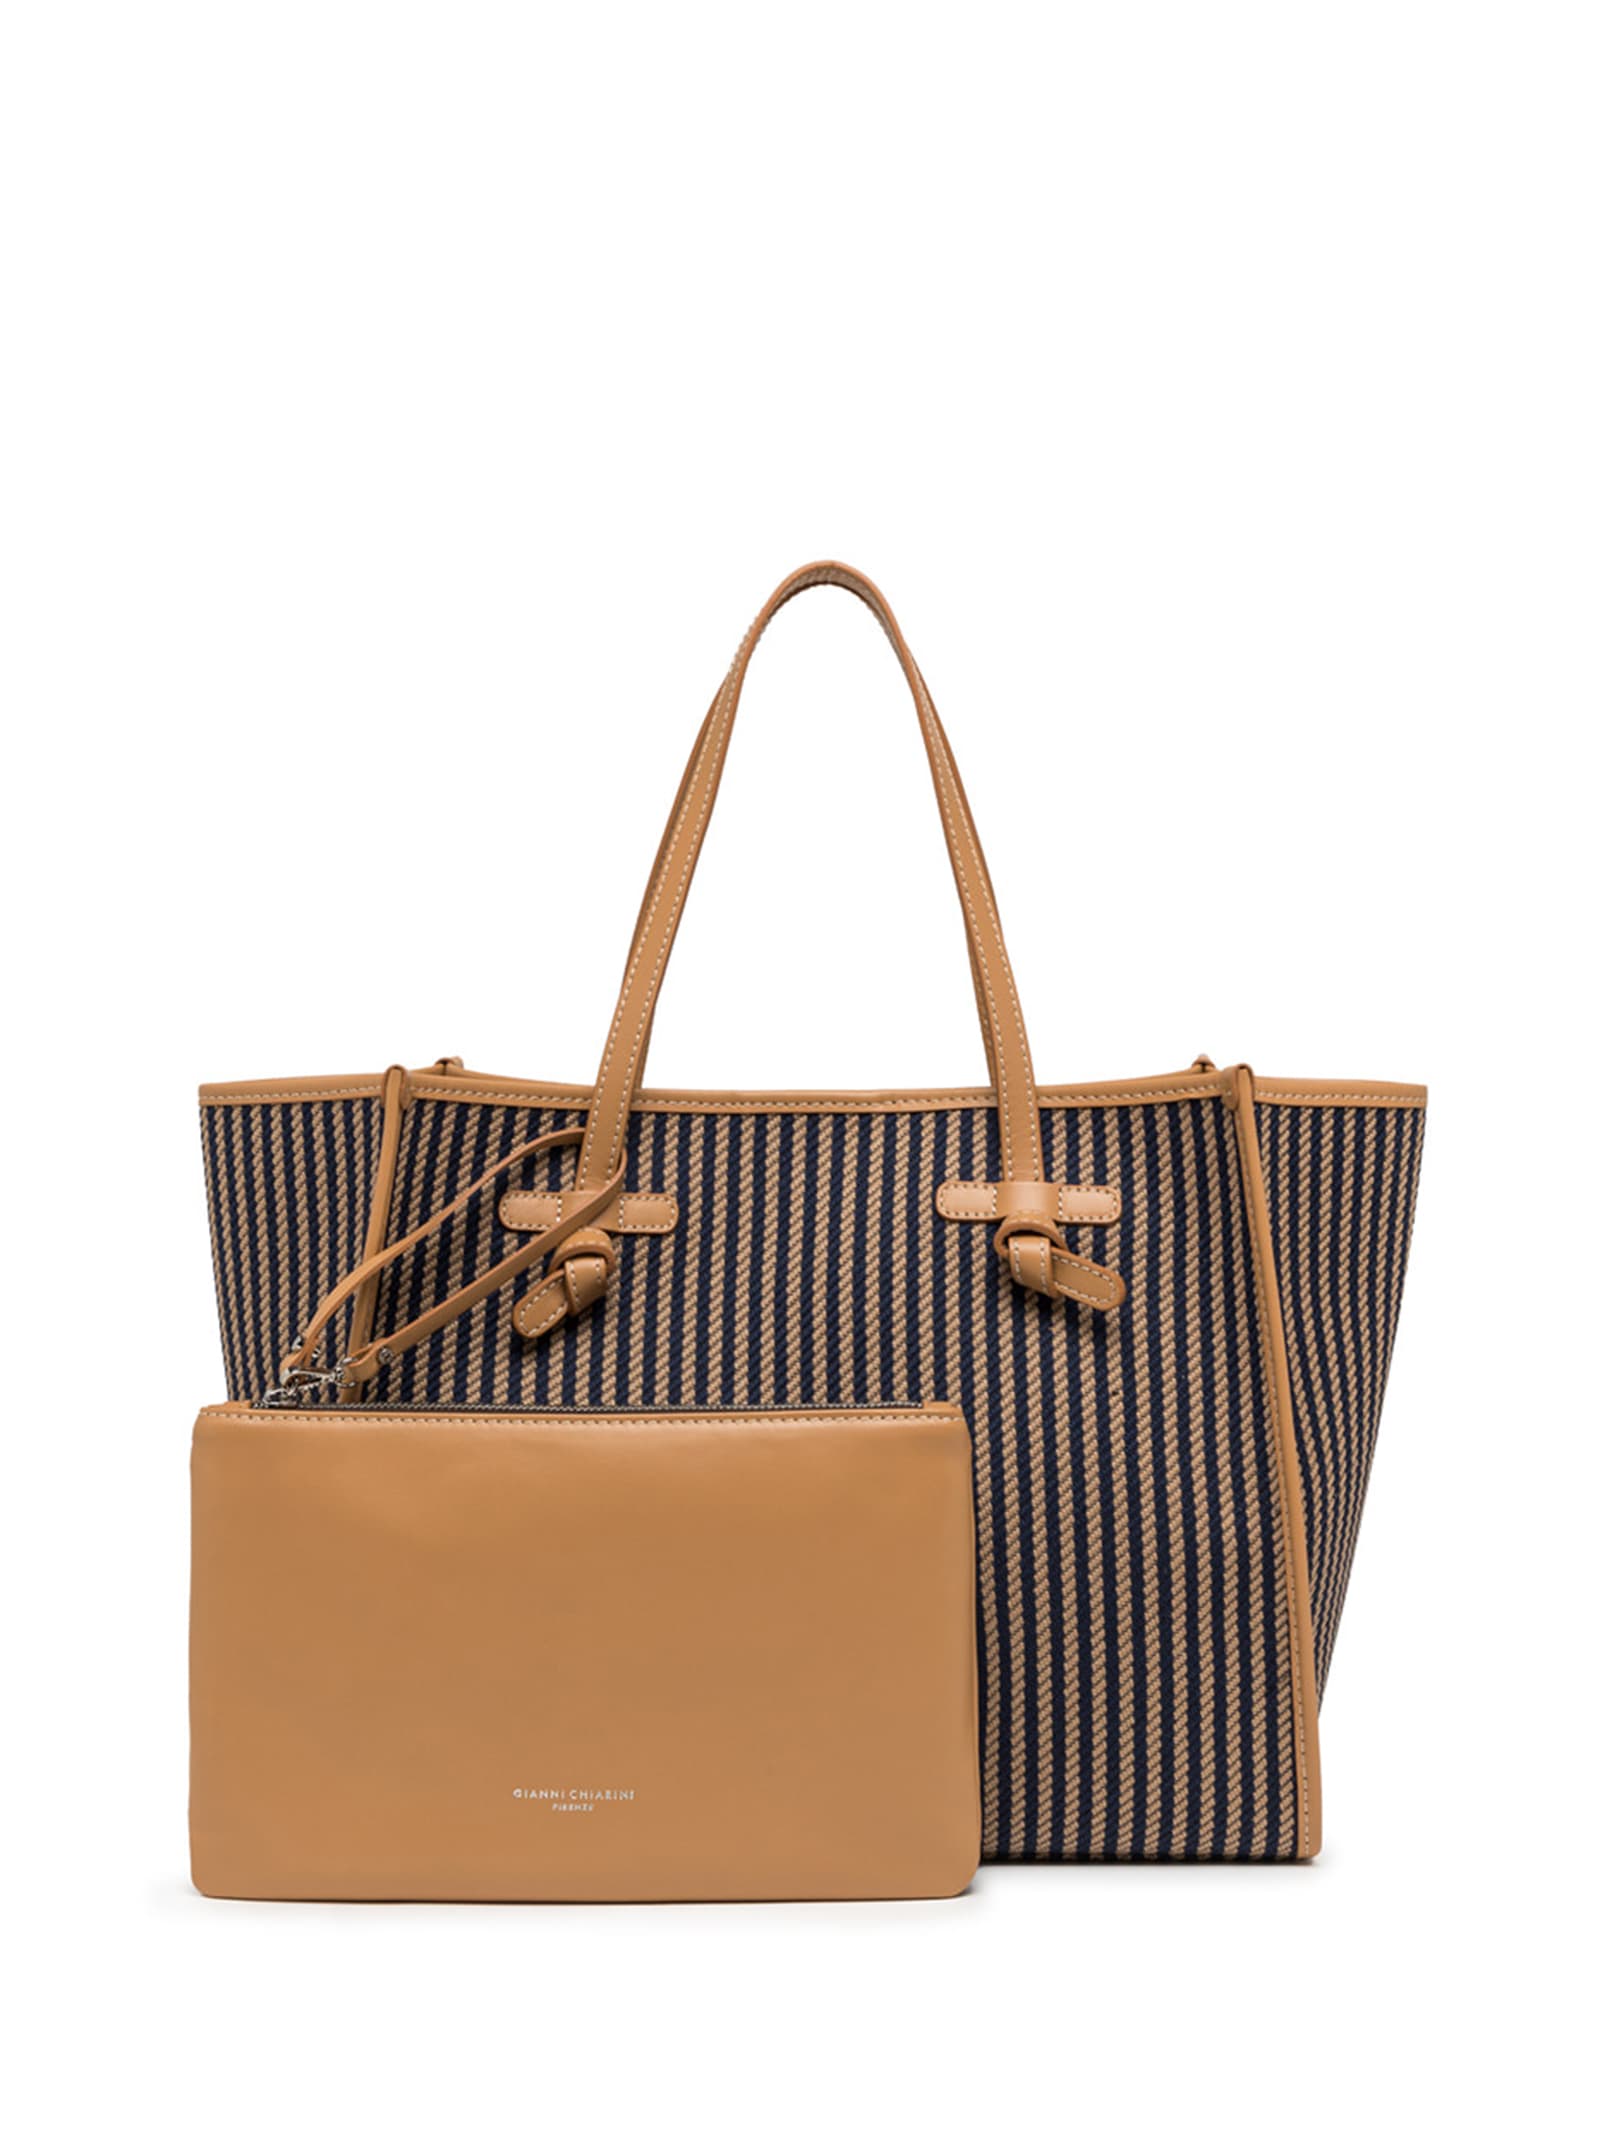 Shop Gianni Chiarini Marcella Shopping Bag In Canvas With Striped Pattern In Var.navy